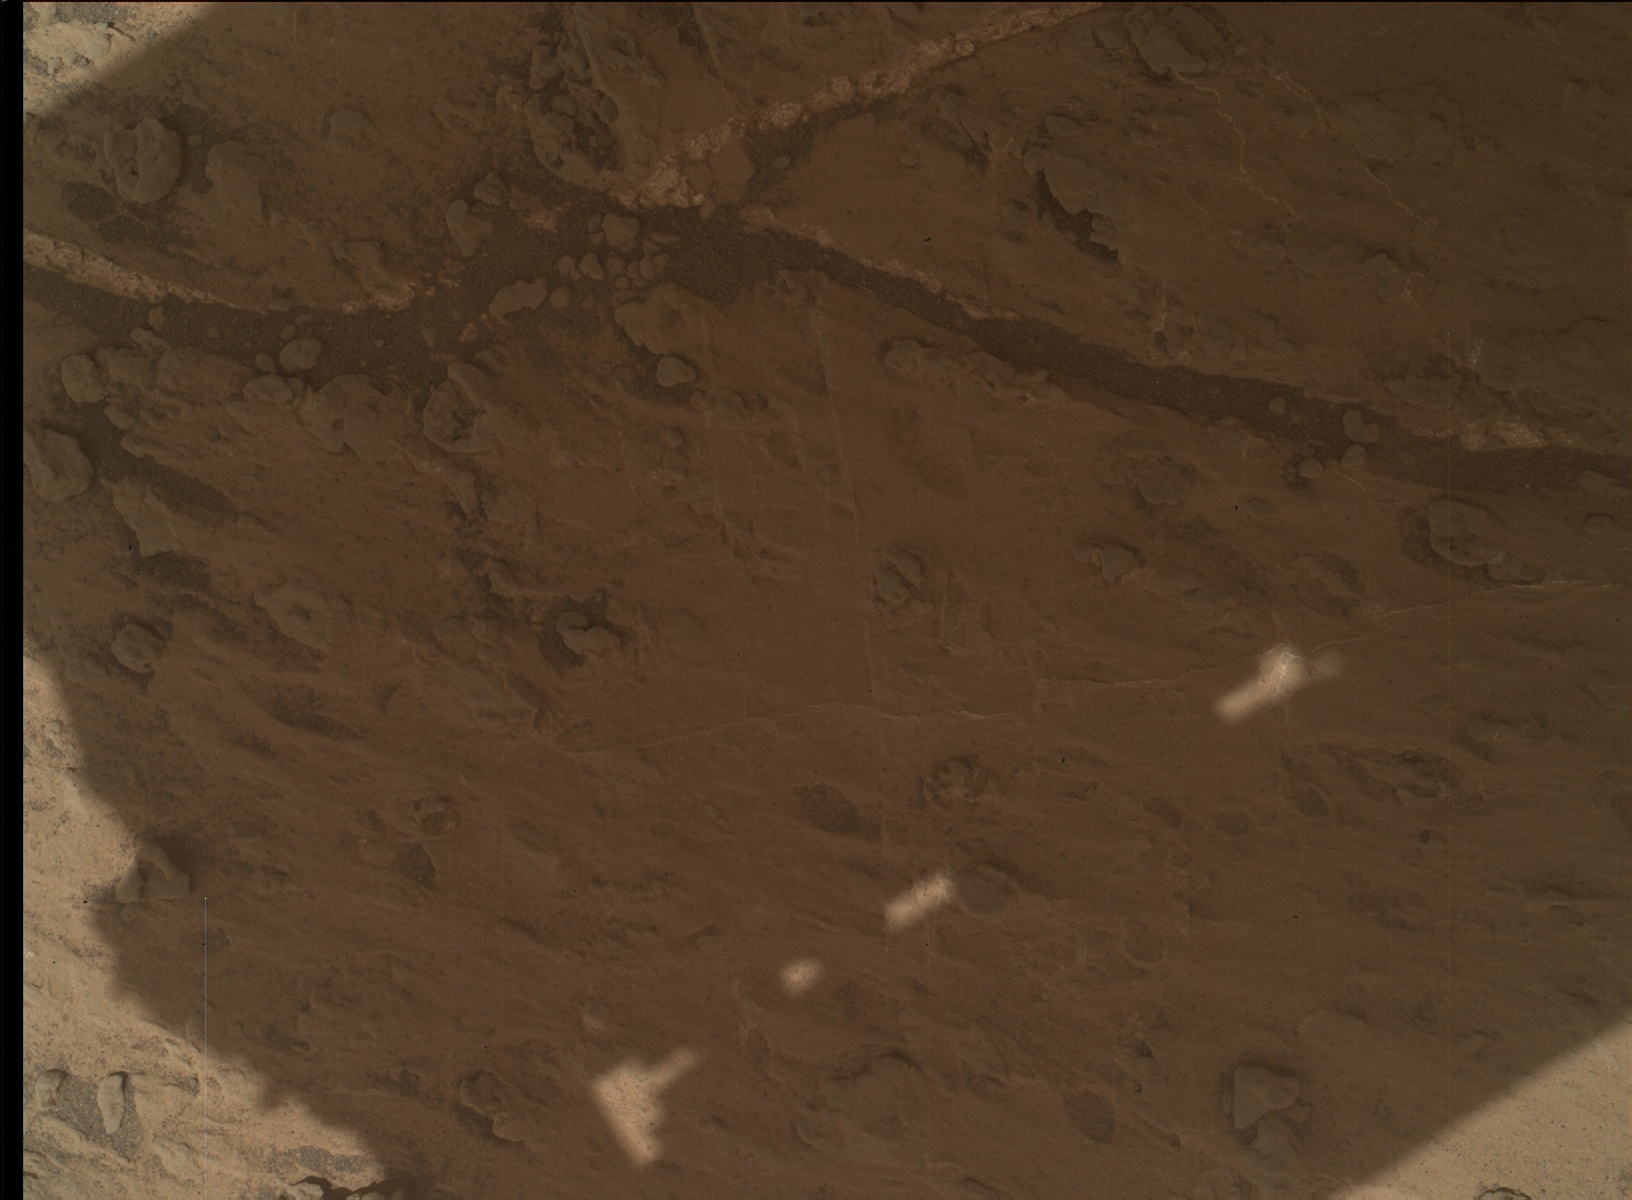 Nasa's Mars rover Curiosity acquired this image using its Mars Hand Lens Imager (MAHLI) on Sol 3199